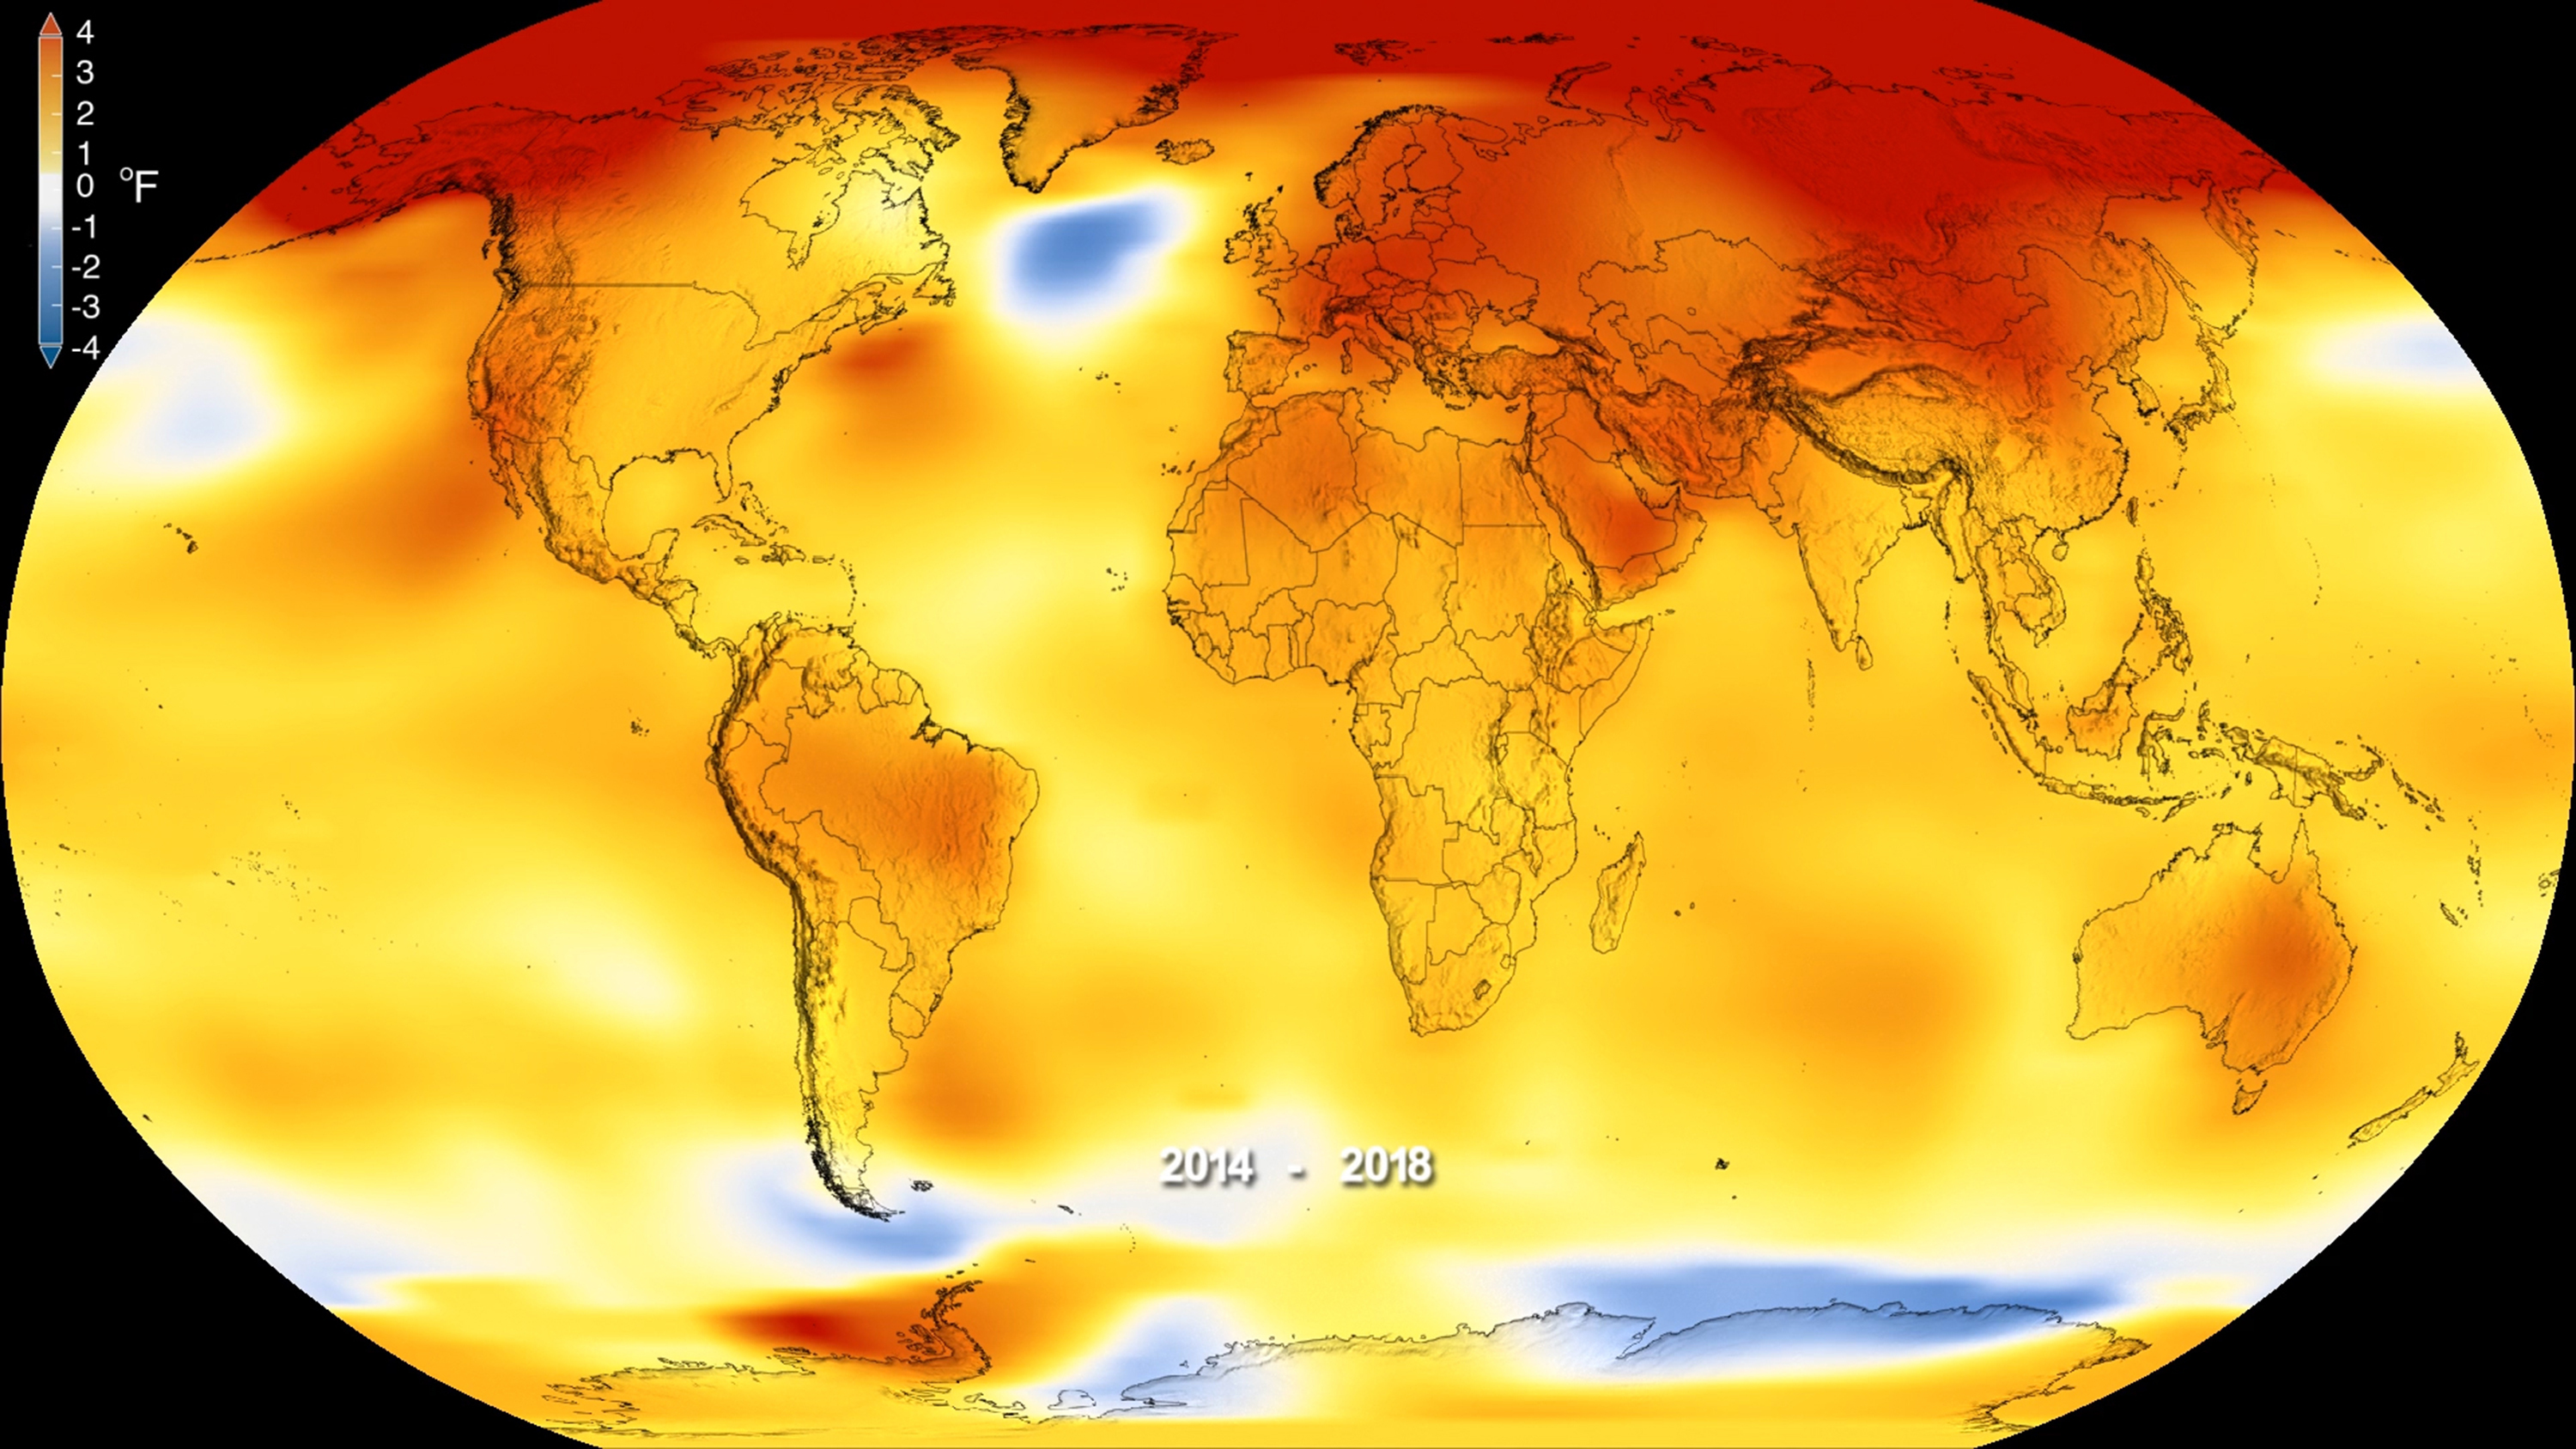 2018 Was Officially The 4th Hottest Year on Record for Earth